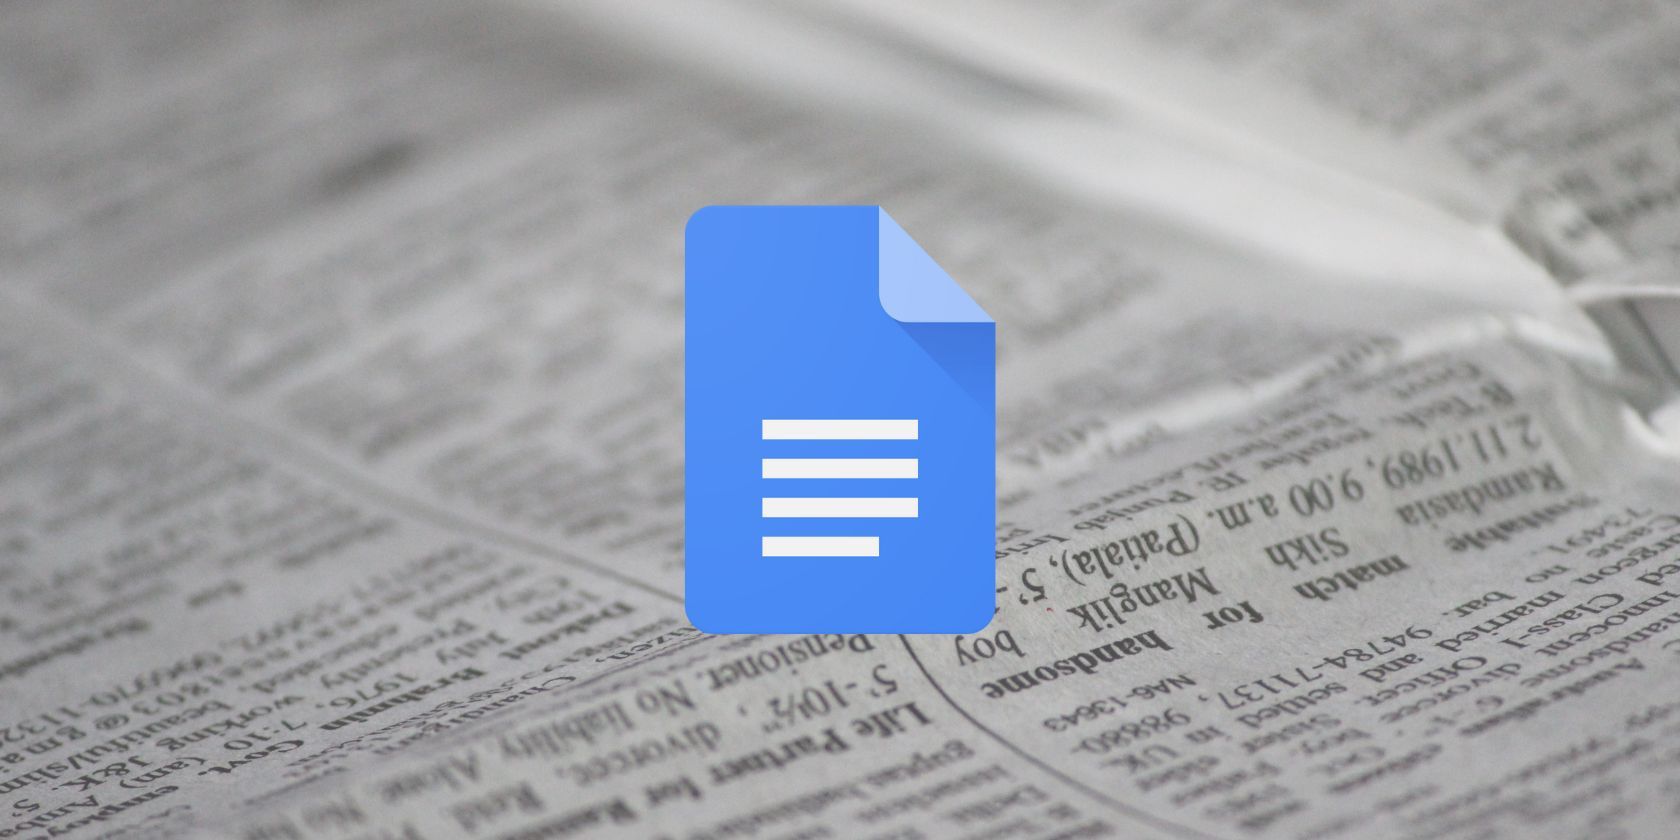 An image of the Google Docs logo in front of newspaper background